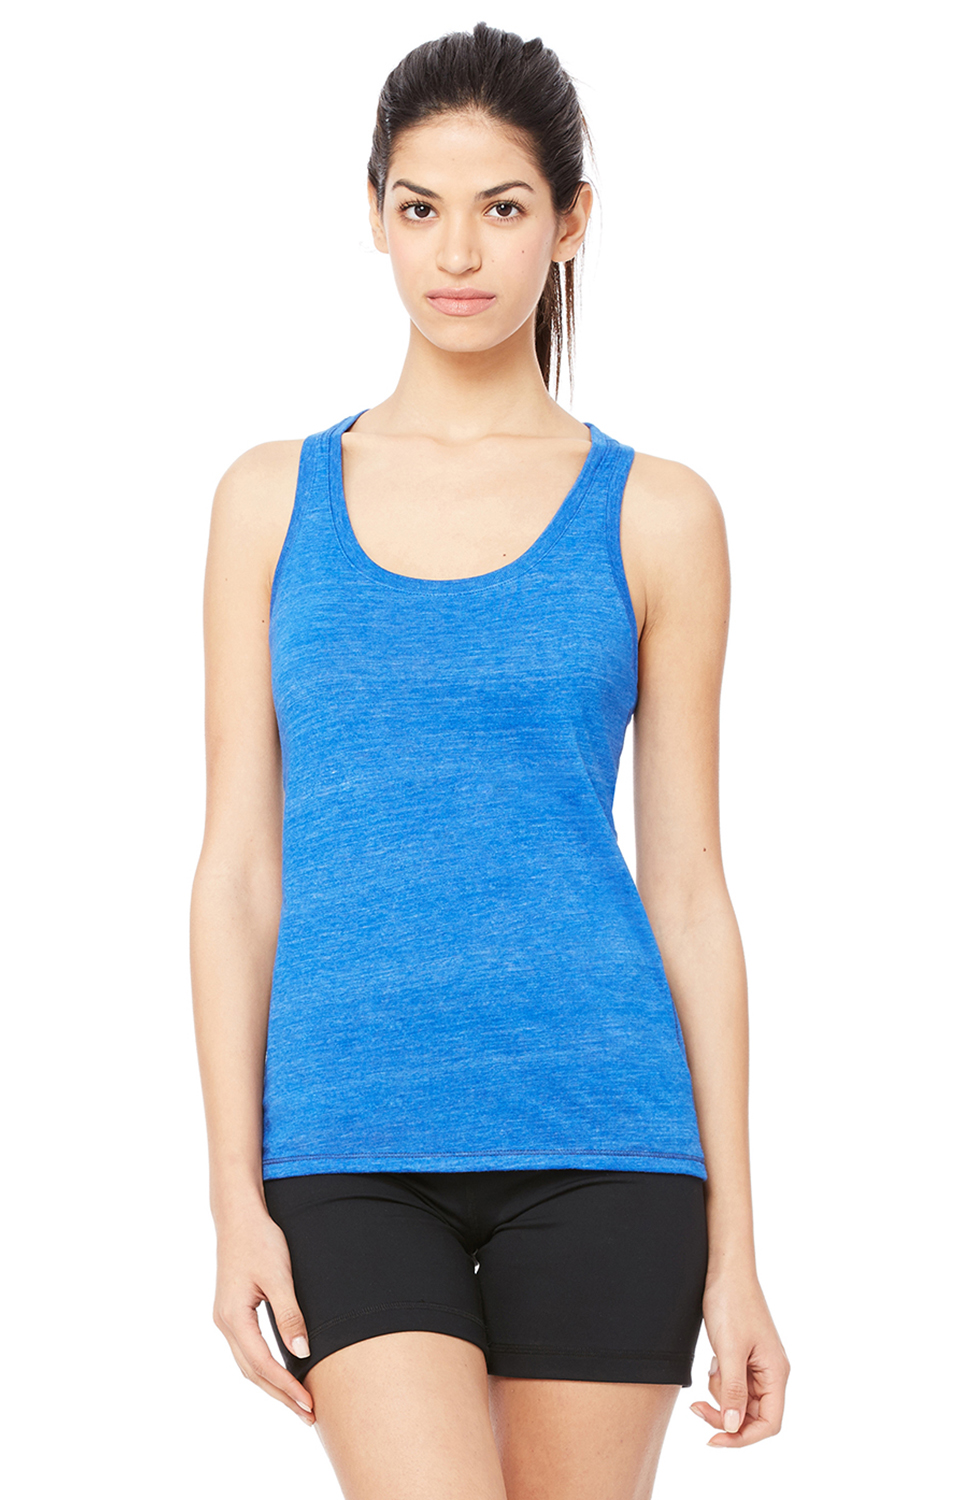 top of the world ncaa womens trim modern fit premium triblend racerback team color icon tank top